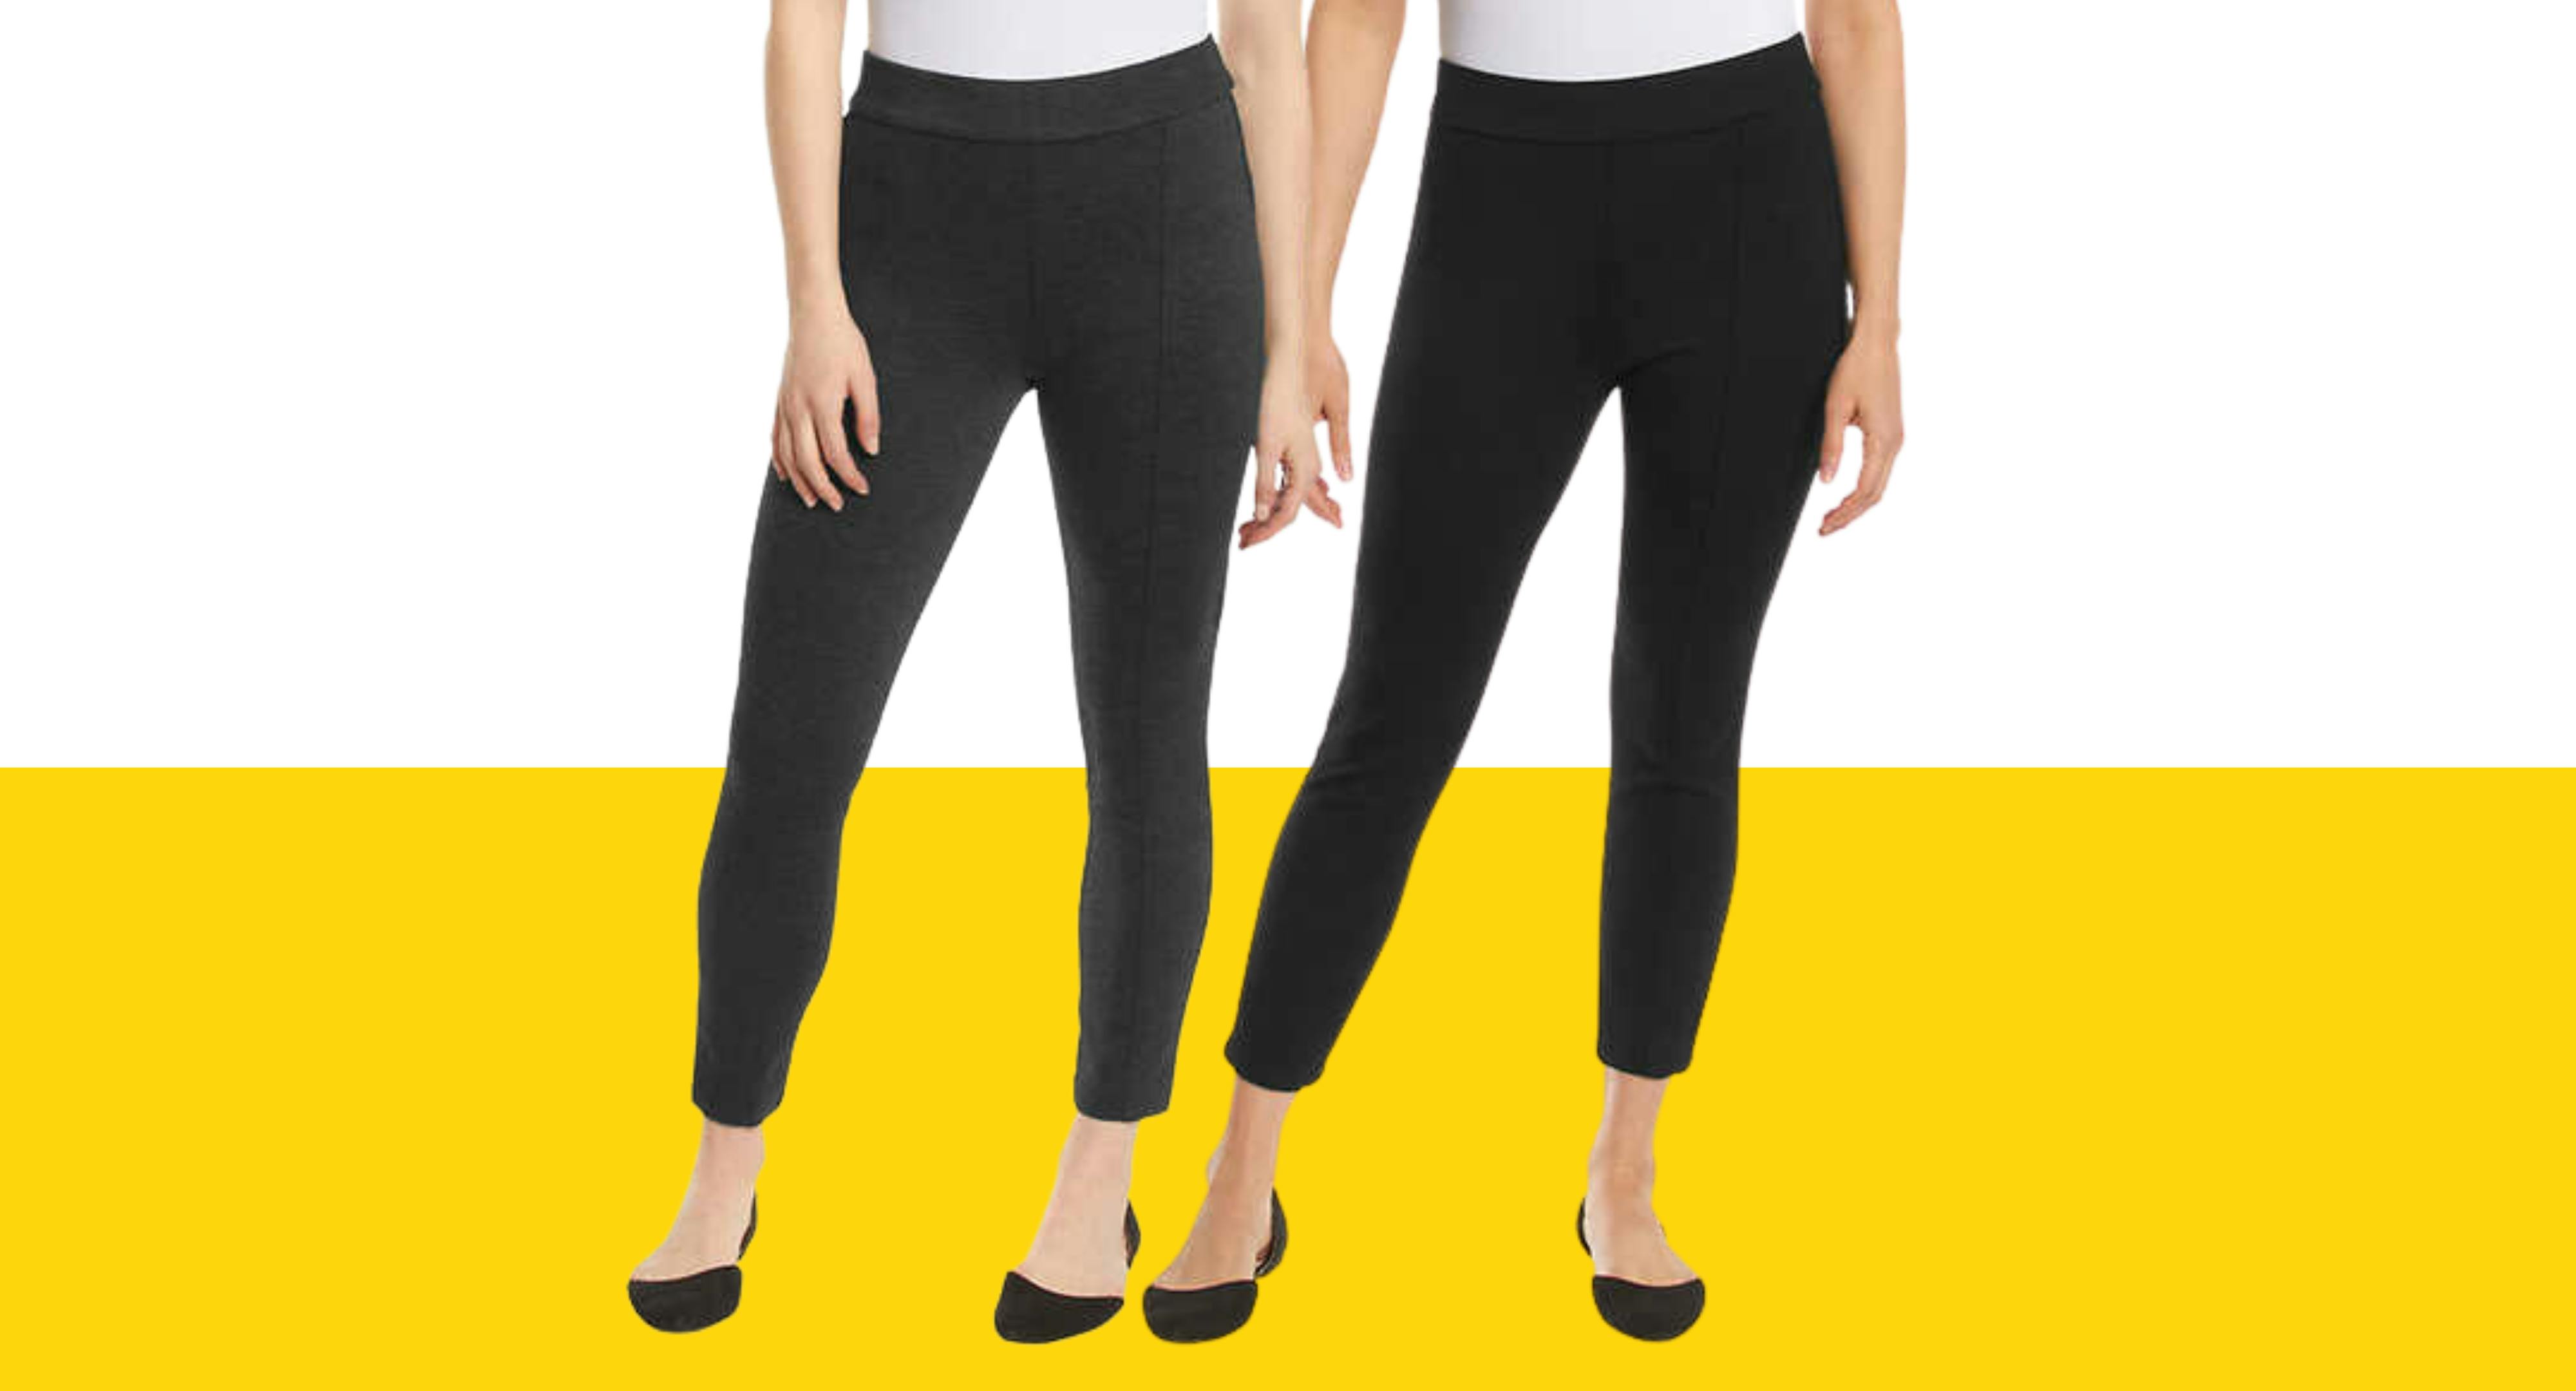 Anne Klein Ponte Pants, Only $9.99 on Costco.com (Reg. $17.99) - The ...